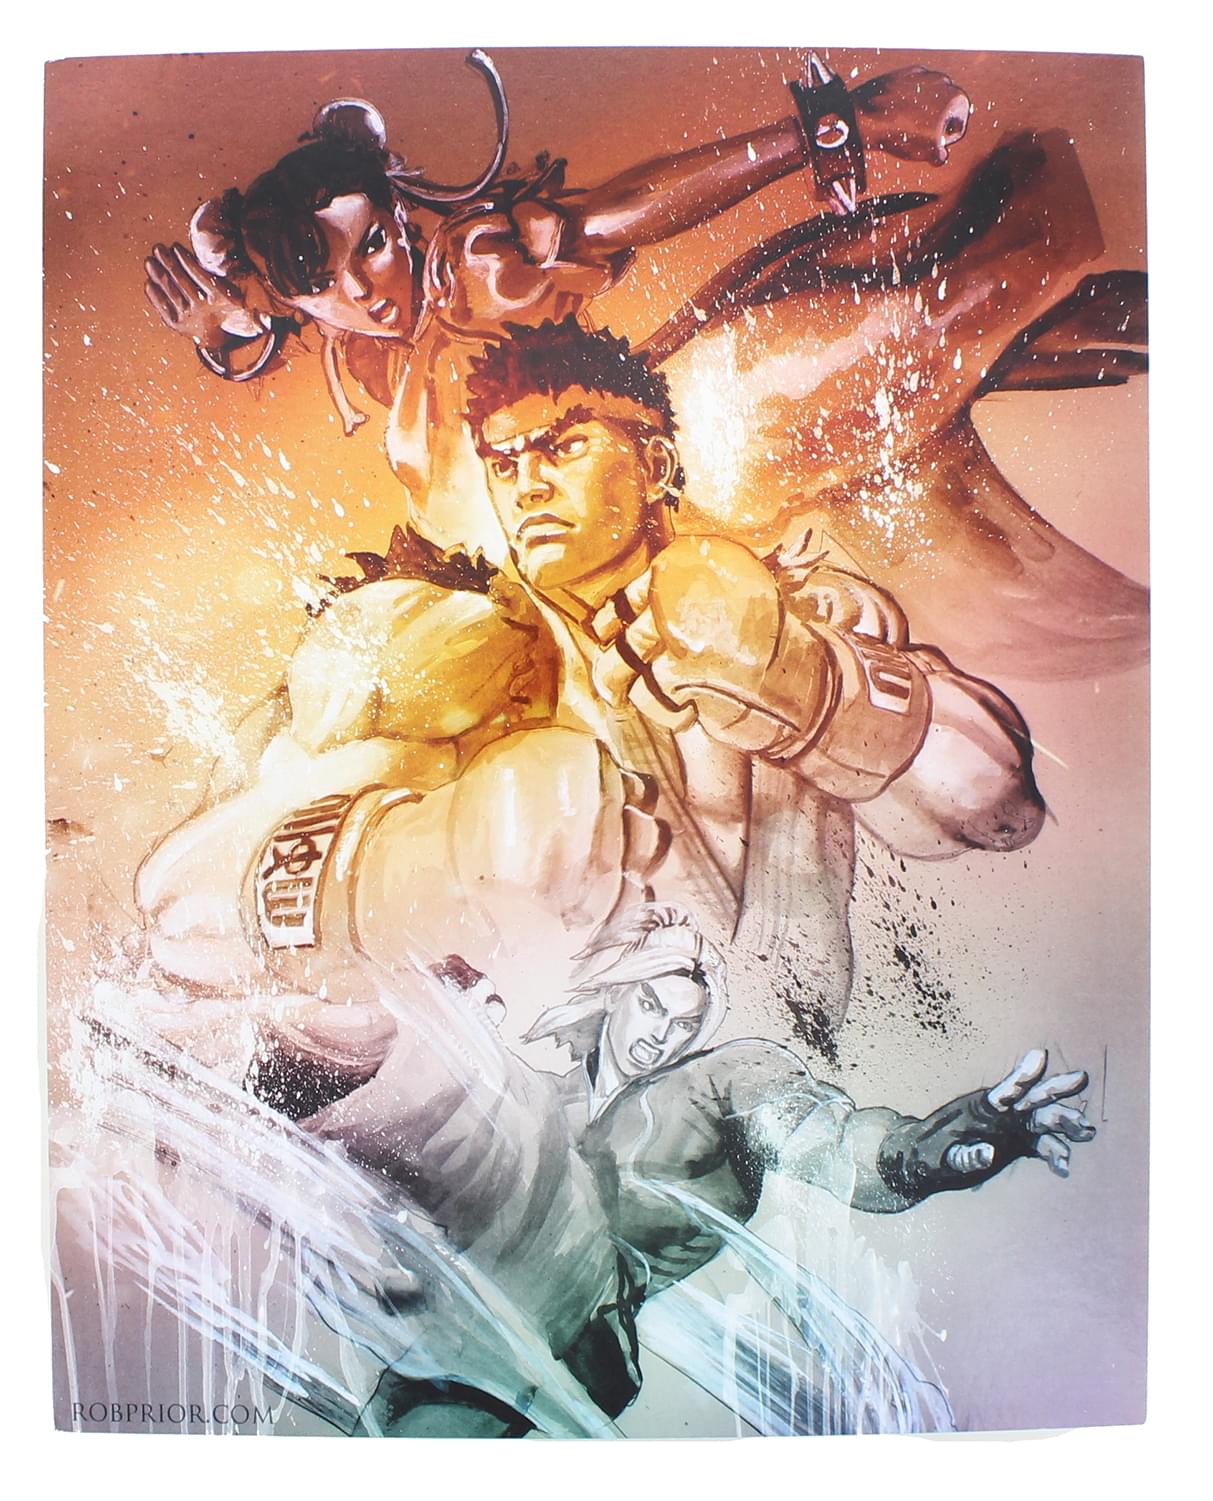 Street Fighter V Versus Limited Edition 8x10 Inch Art Print by Rob Prior